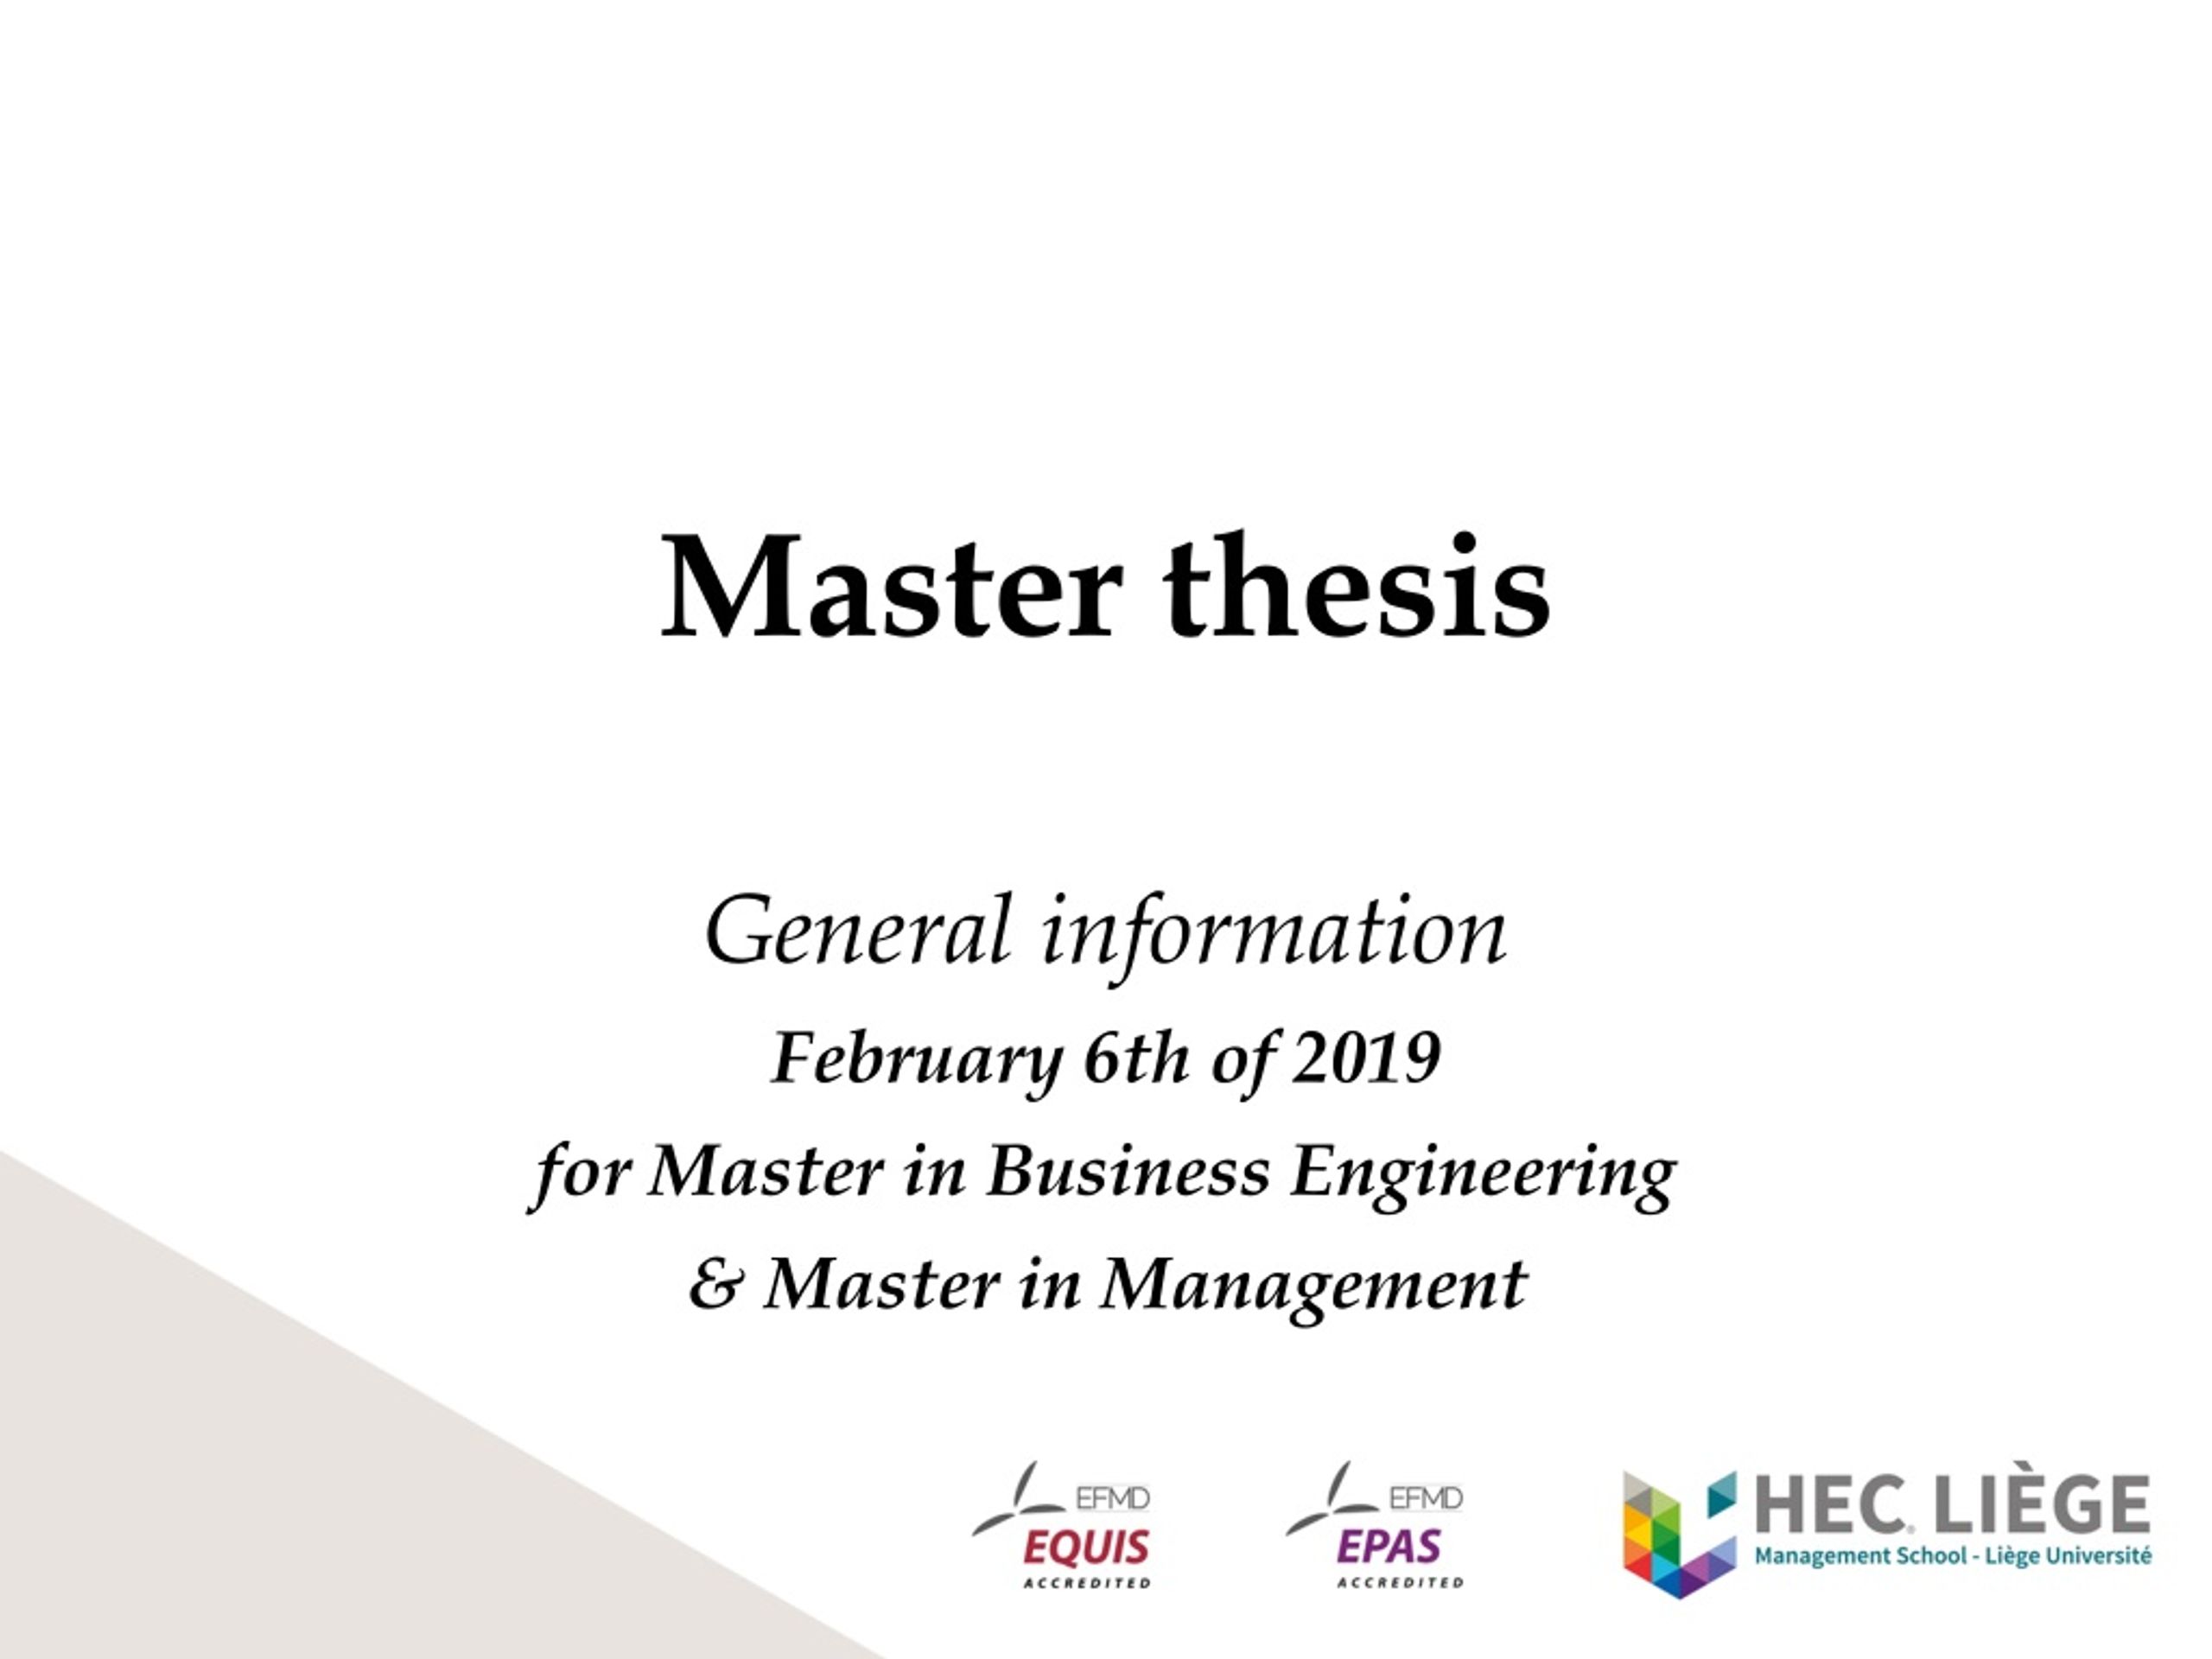 masters thesis guide